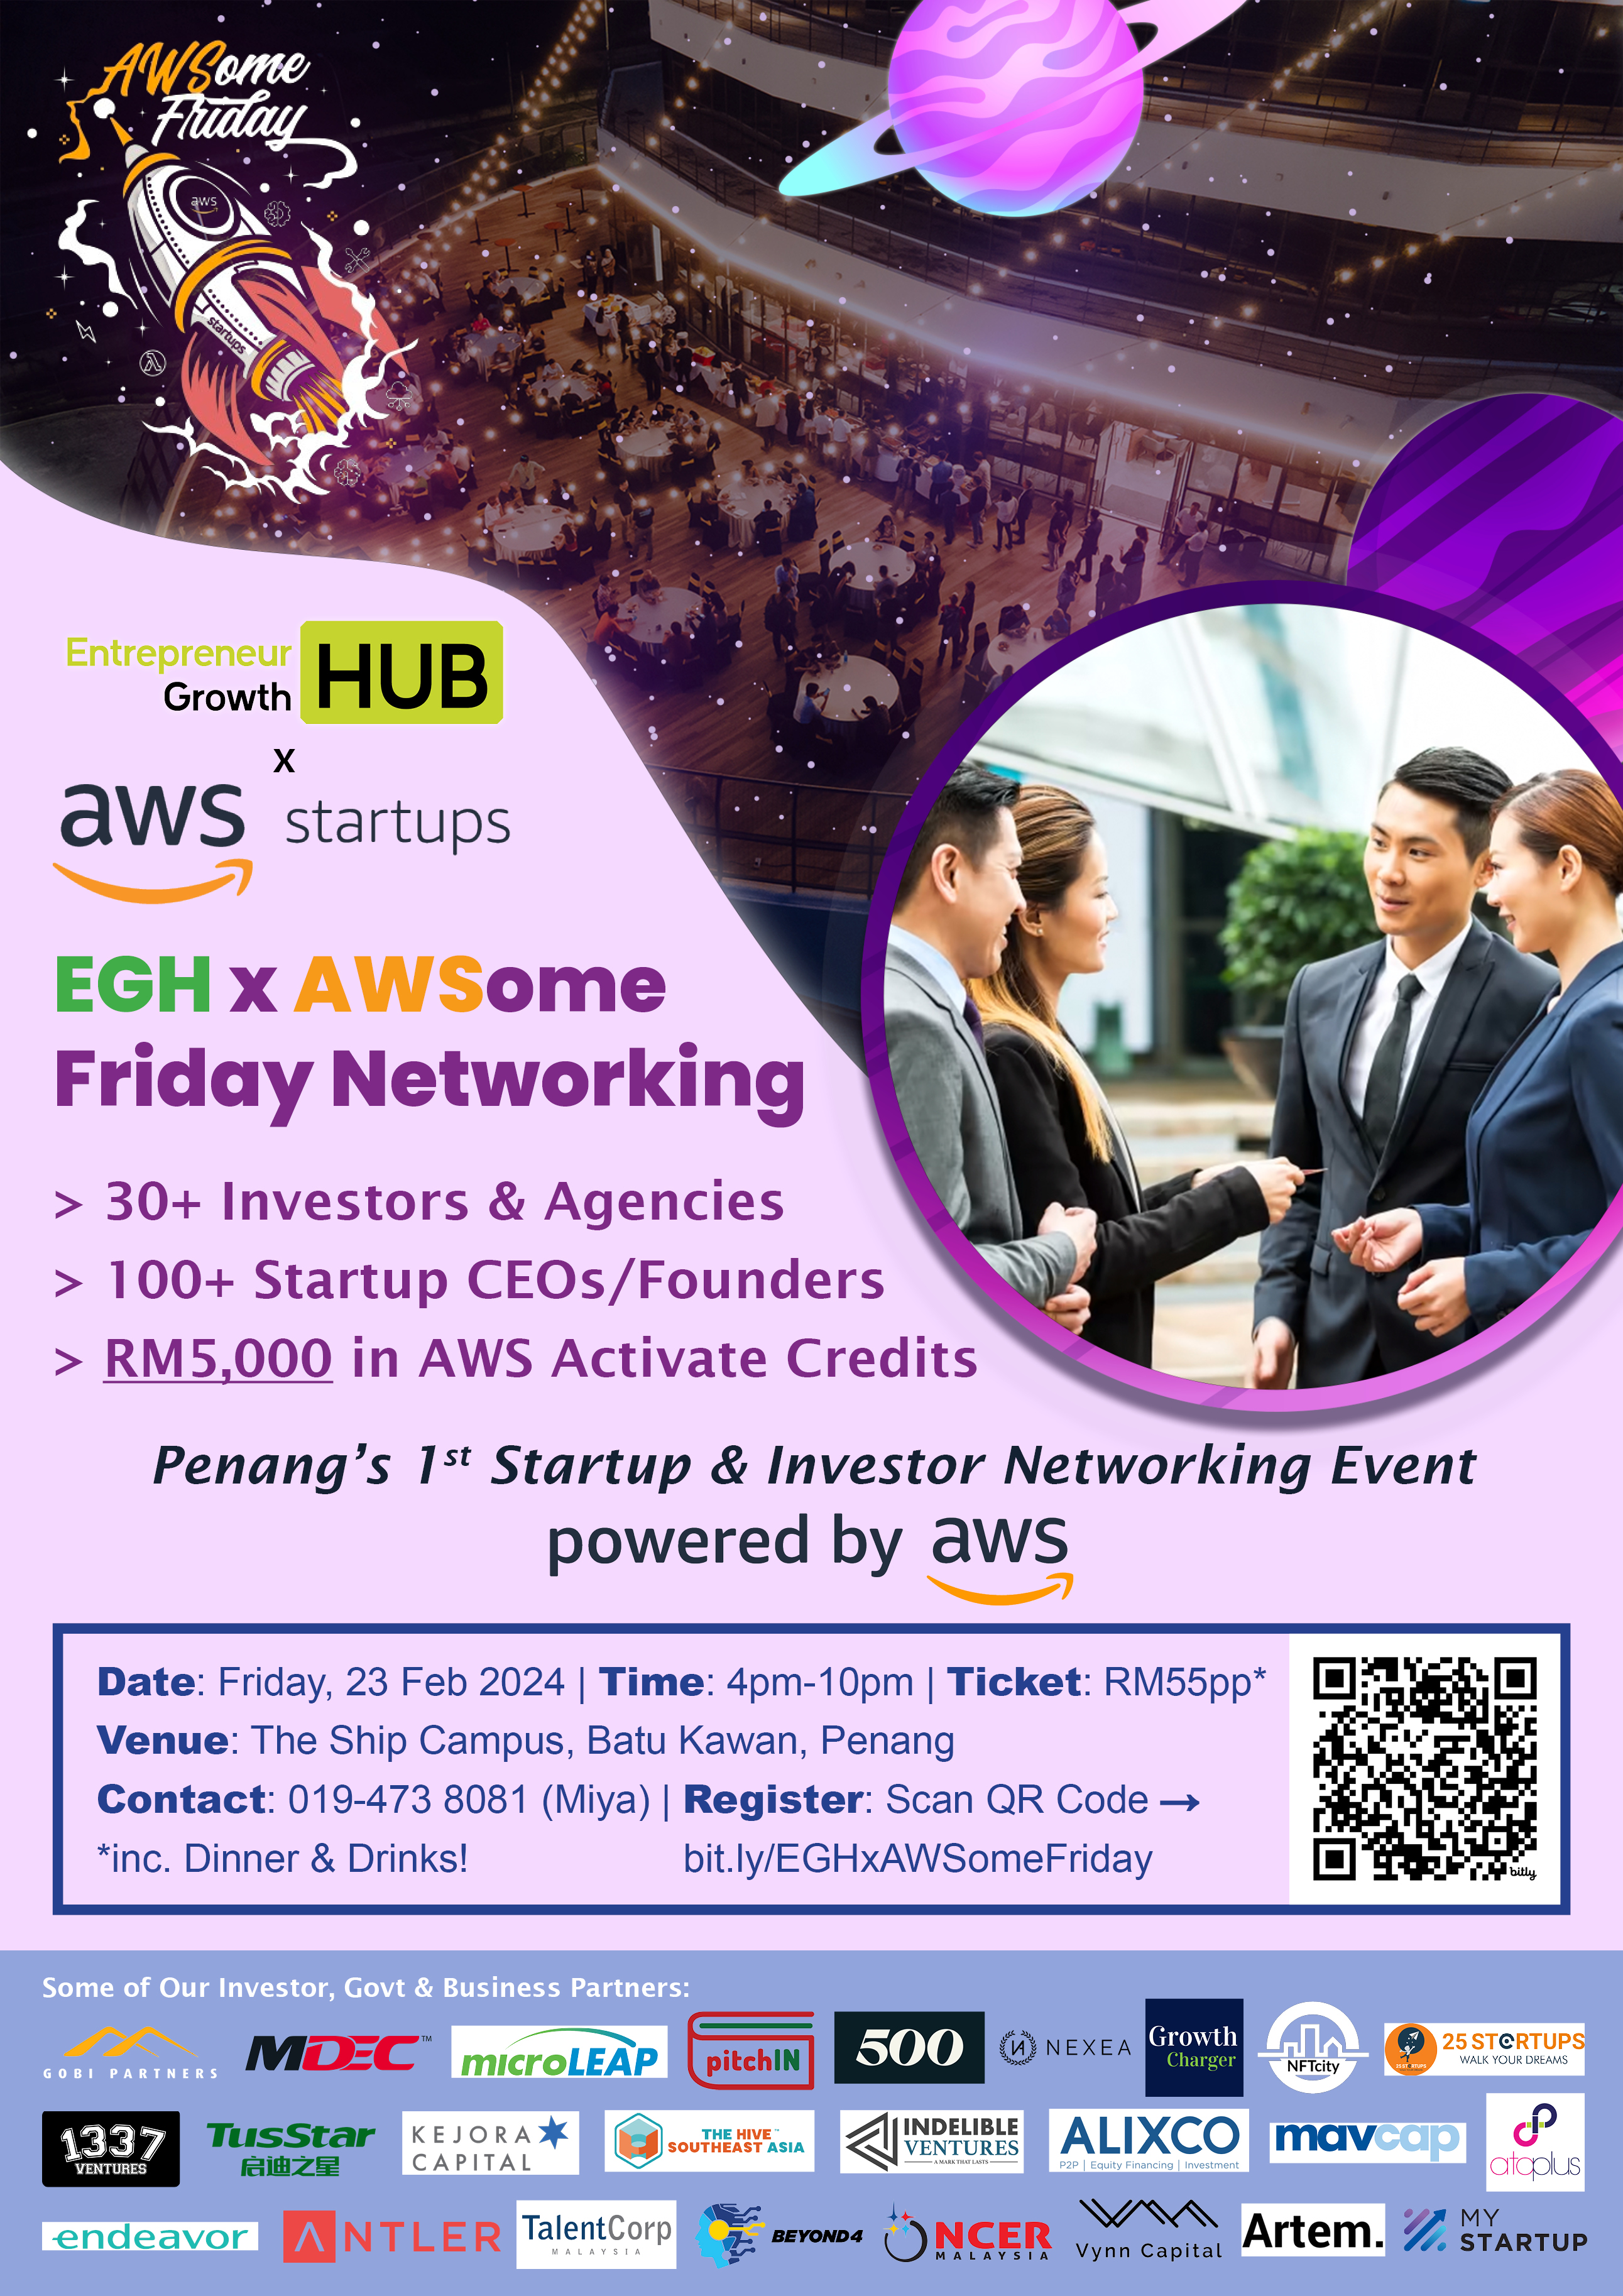 Participate in the EGH x AWSome Friday networking event  